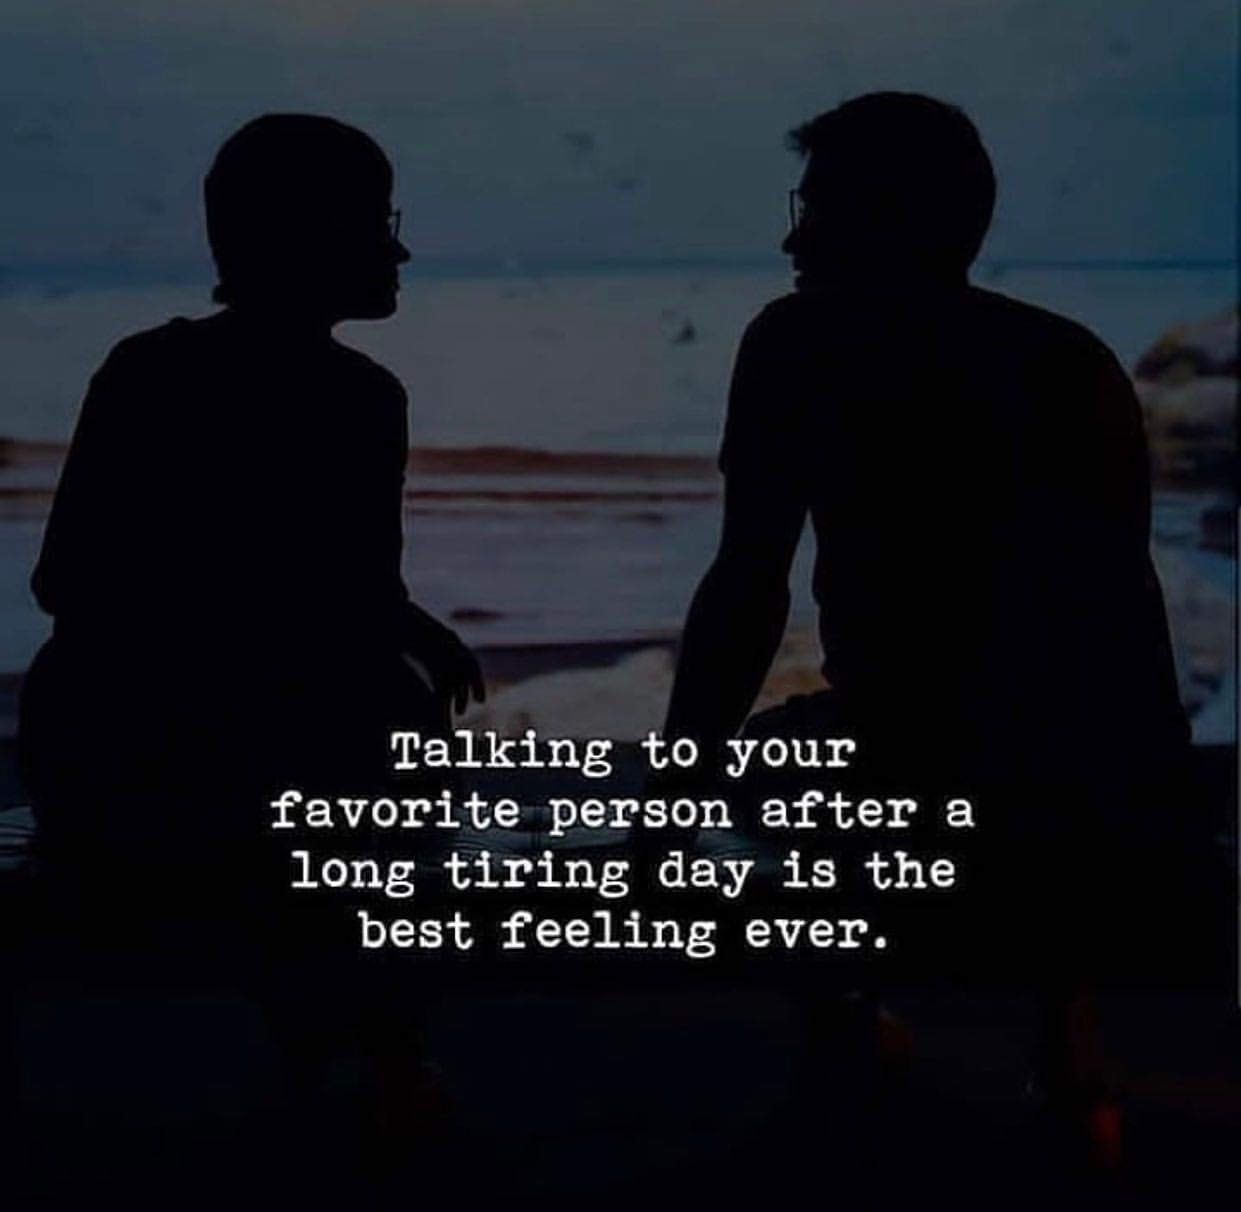 Talking to your favorite person after a long tiring day is the best feeling ever.